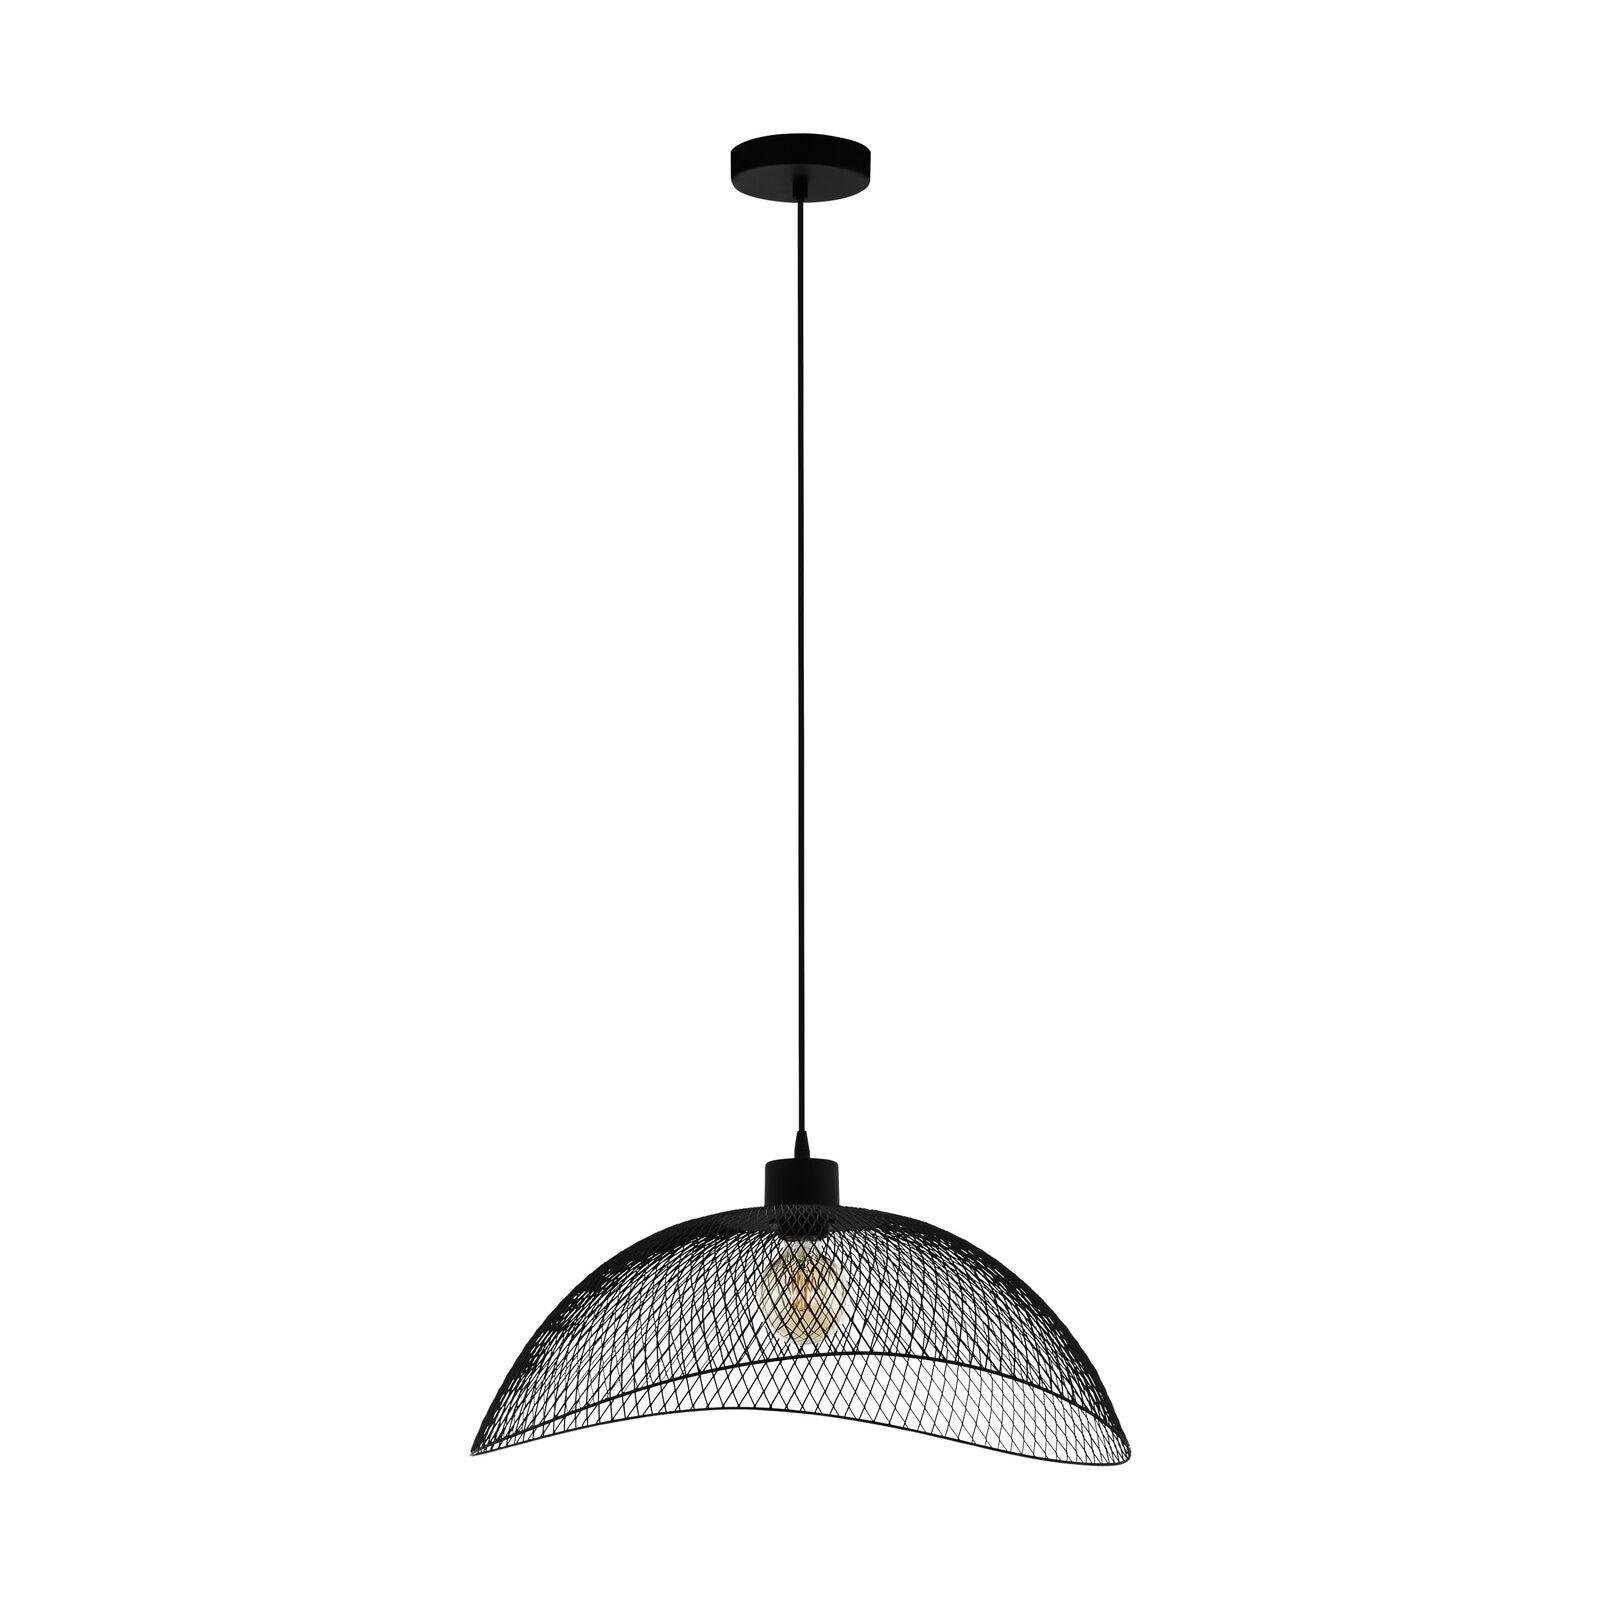 Hanging Ceiling Pendant Light Black Steel Mesh Shade 1x 60W E27 Feature Lamp